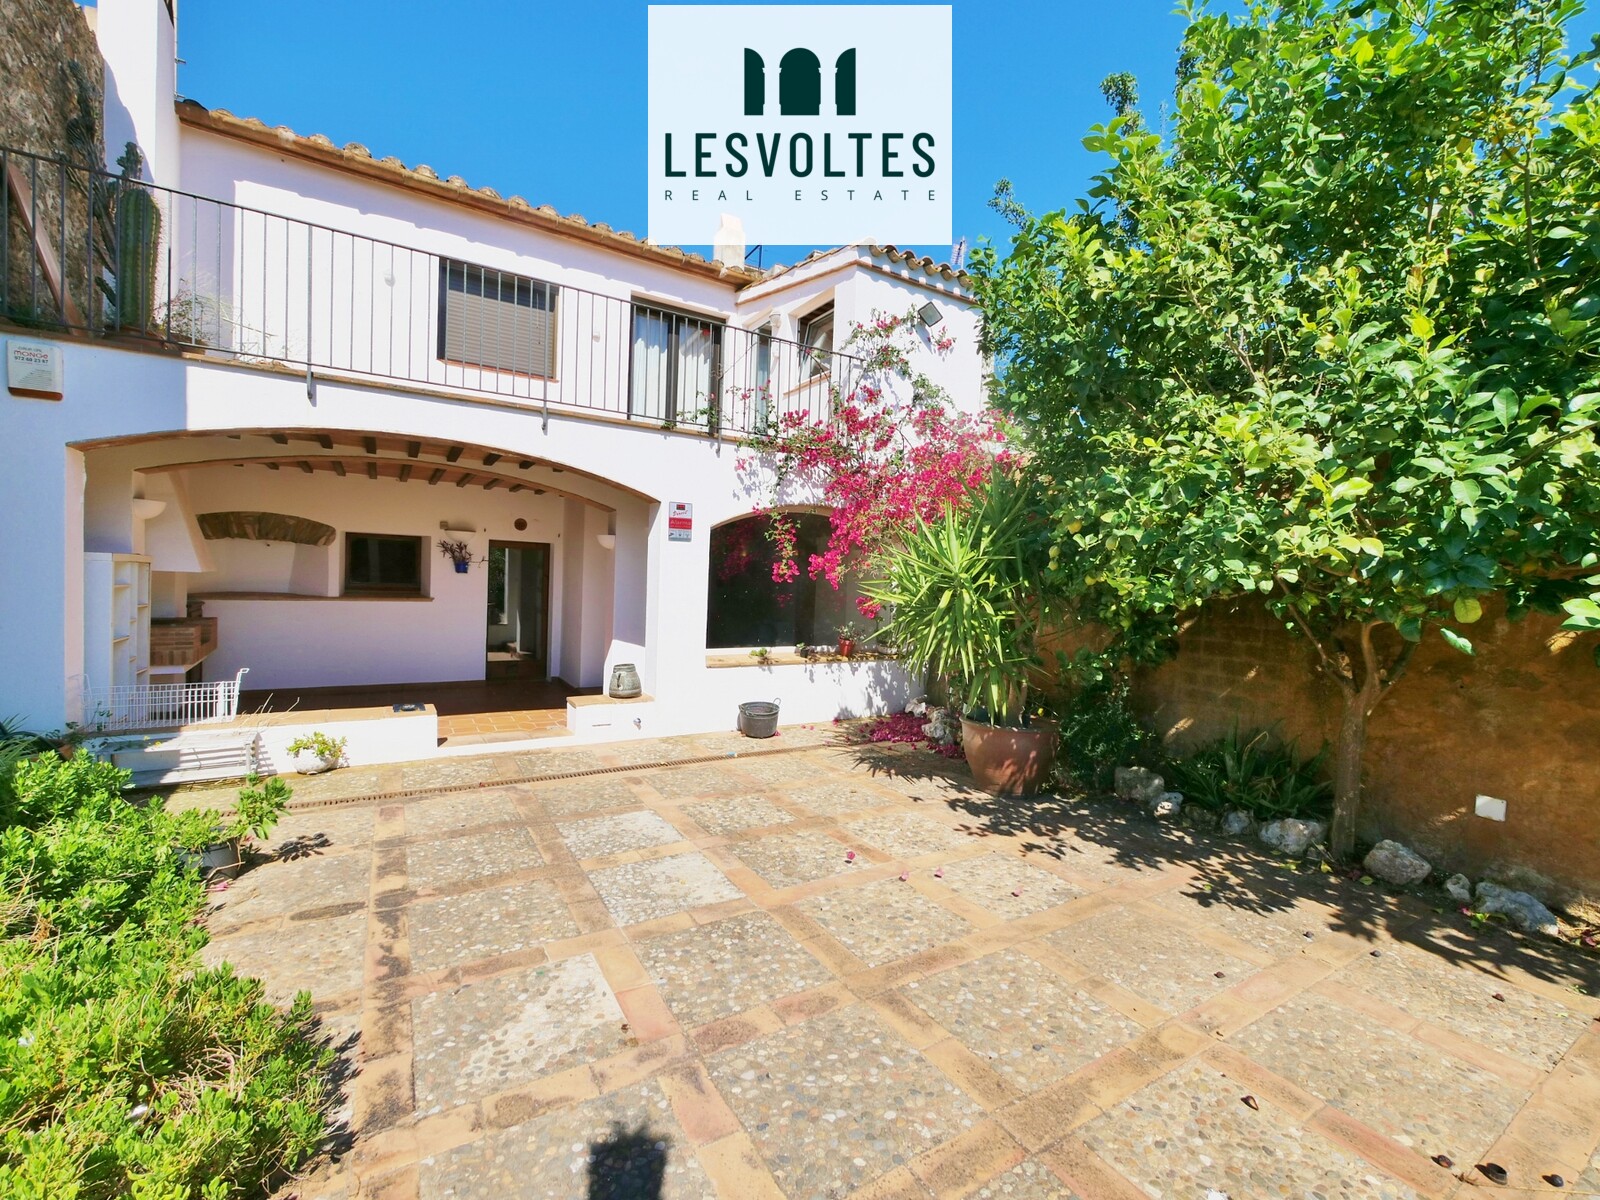 Magnificent town house with garden for rent in the center of Palafrugell. Very quiet residential area one step from the cente